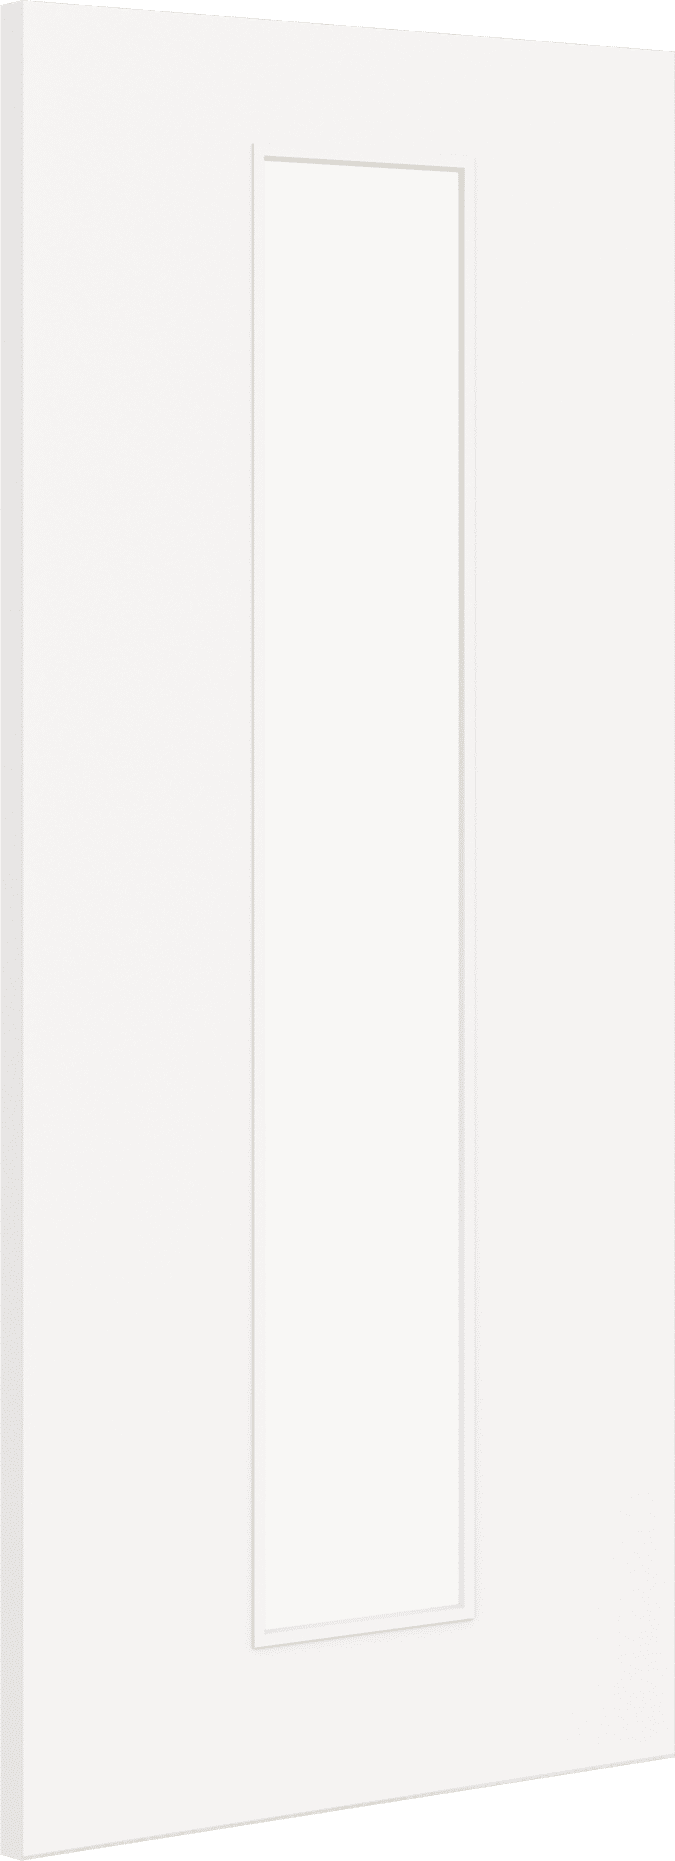 2040mm x 726mm x 44mm Architectural Paint Grade White 10 Frosted Glazed Fire Door Blank